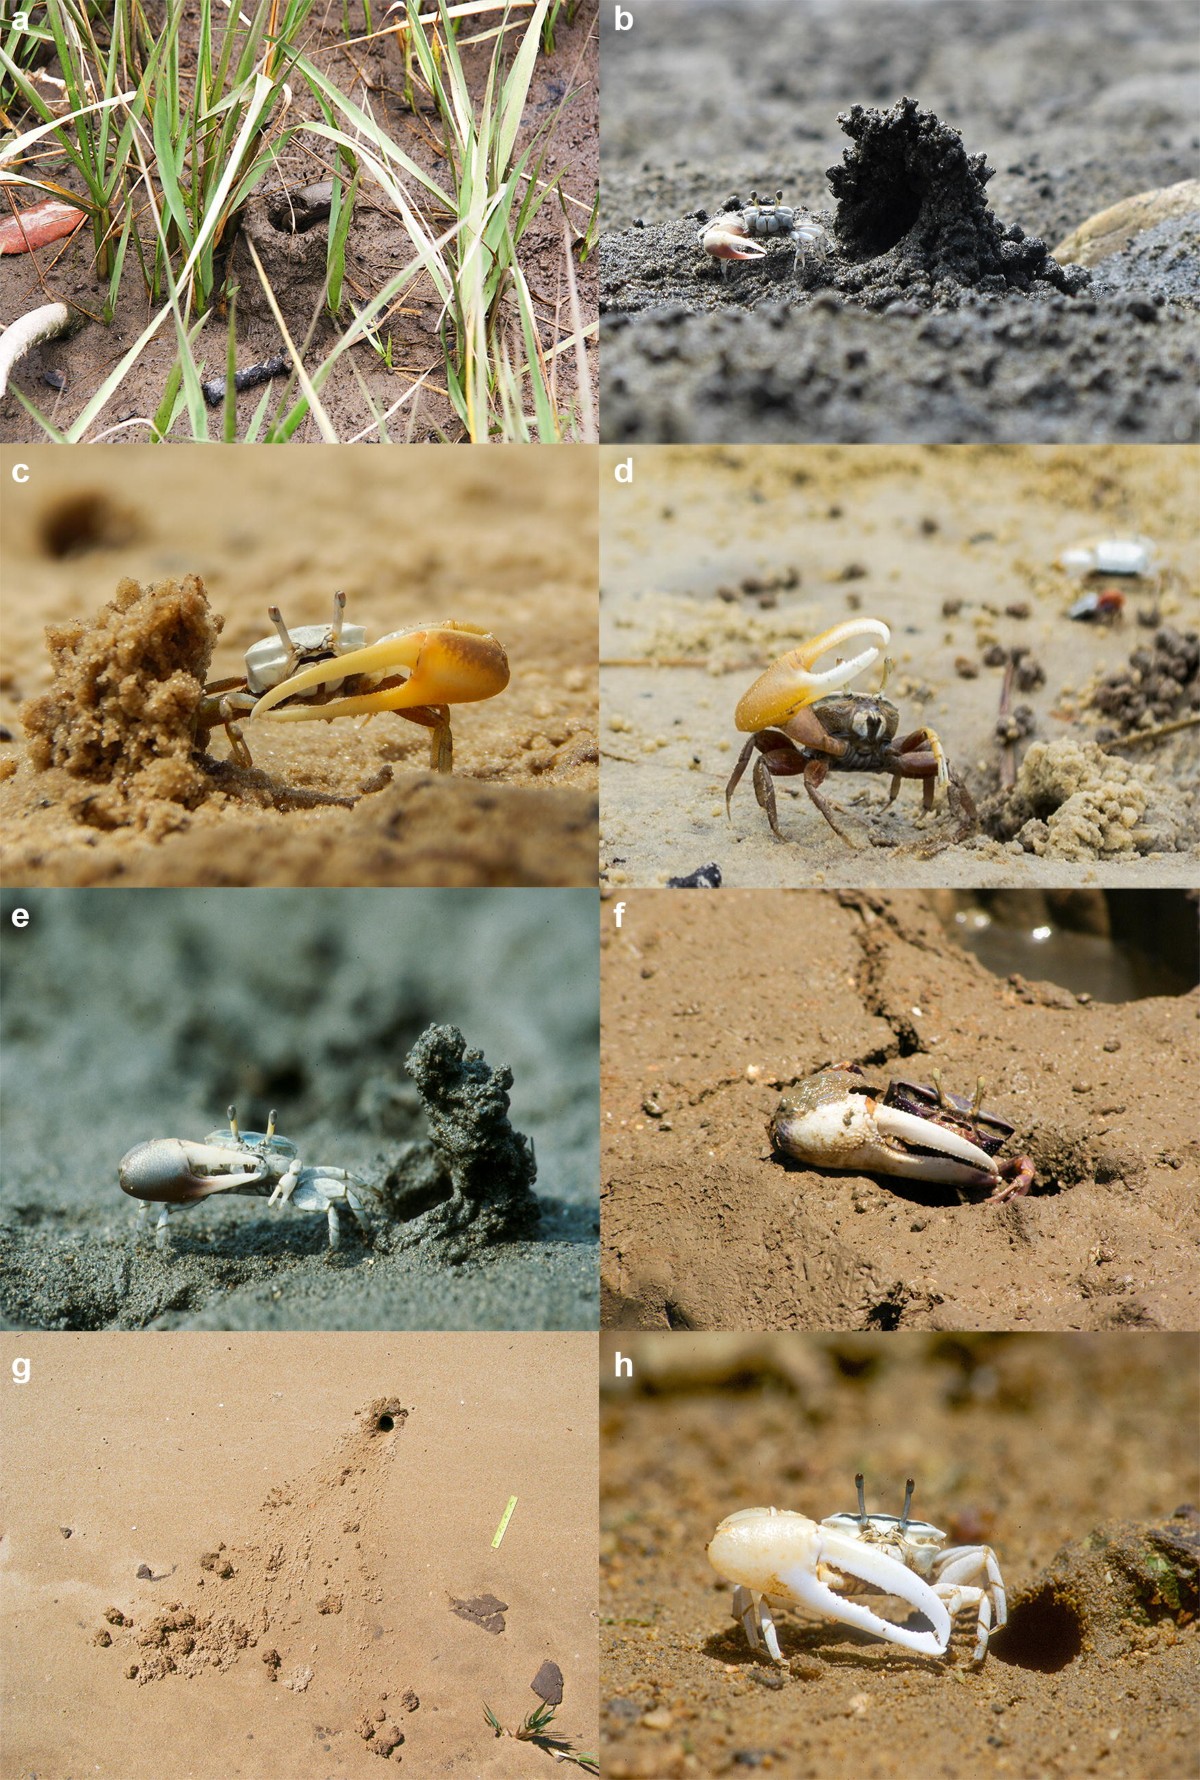 EPC of Hillsborough on X: Fiddler crab burrows are good